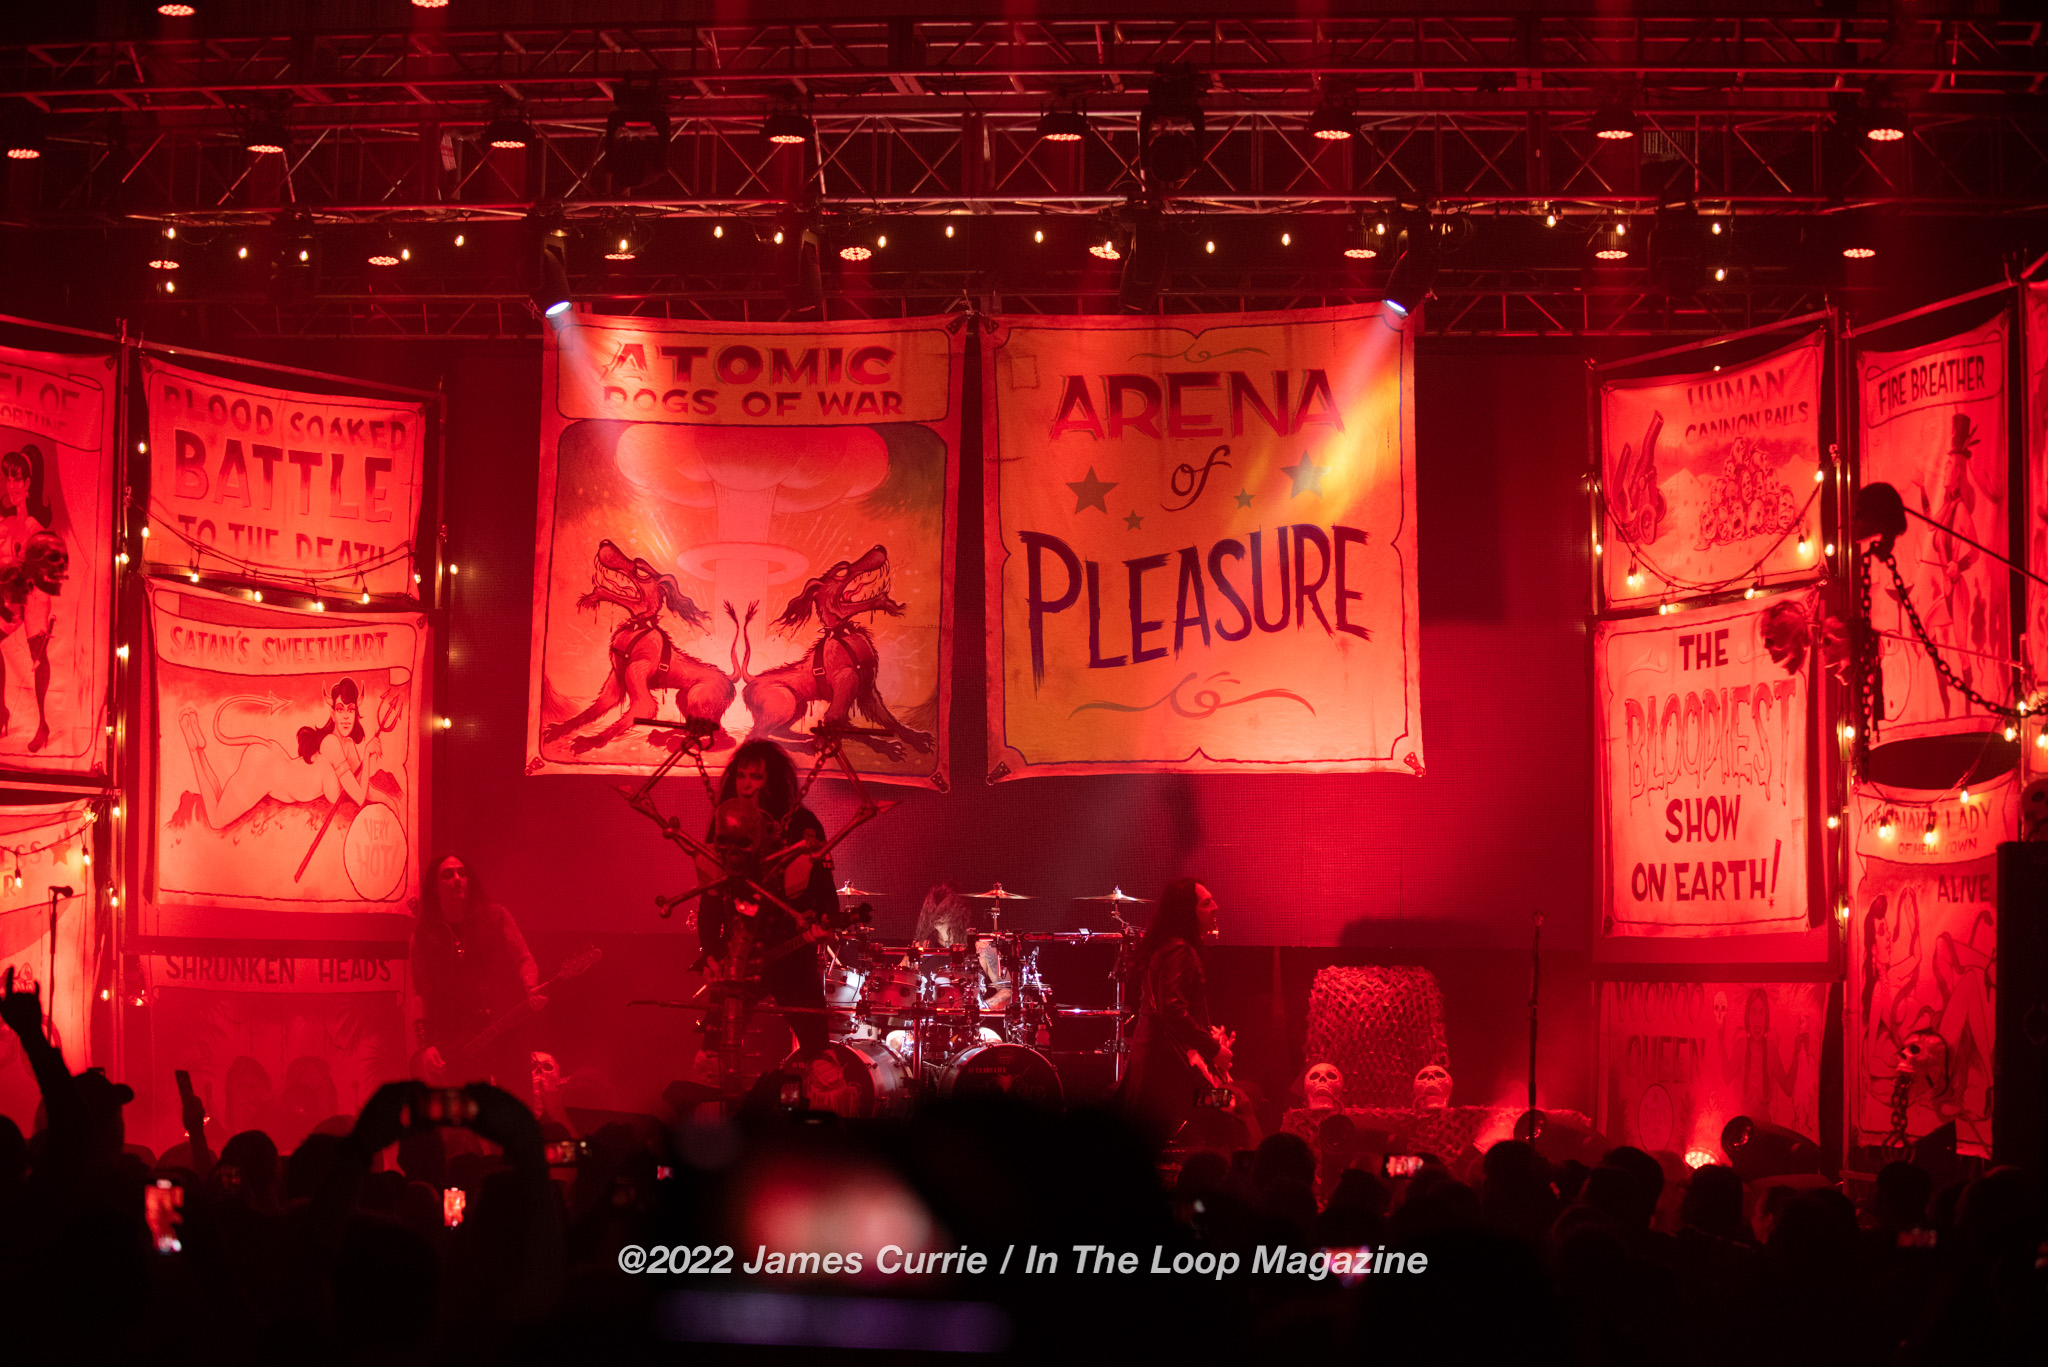 L.A. Shock Rockers W.A.S.P. Made A Triumphant Return To The Chicagoland Area With A 40th Anniversary Spectacular Show